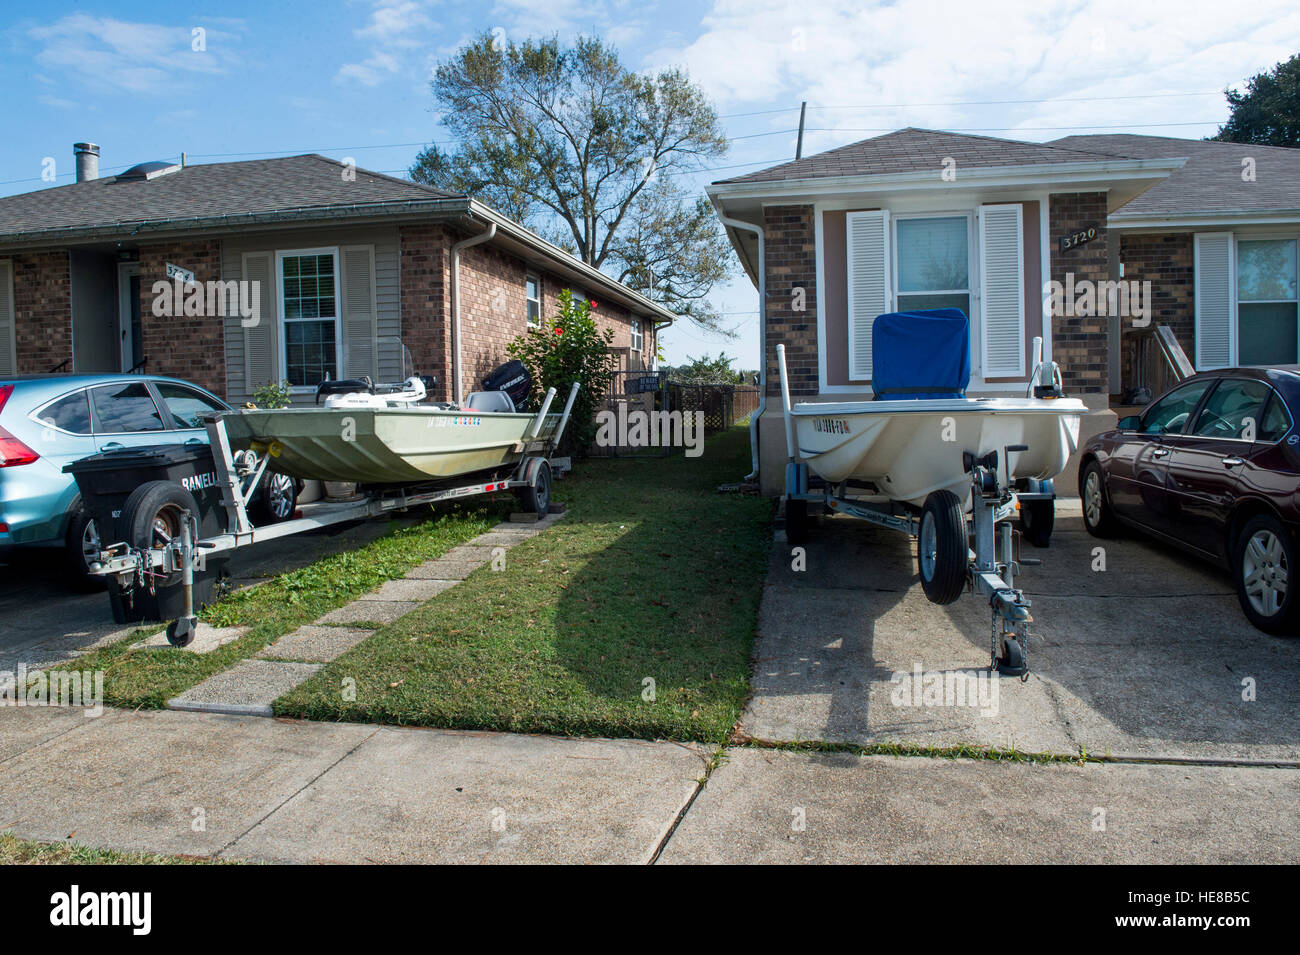 Boats parked in residential front yards in Kenner, La. on Friday, Dec. 16, 2016. Stock Photo